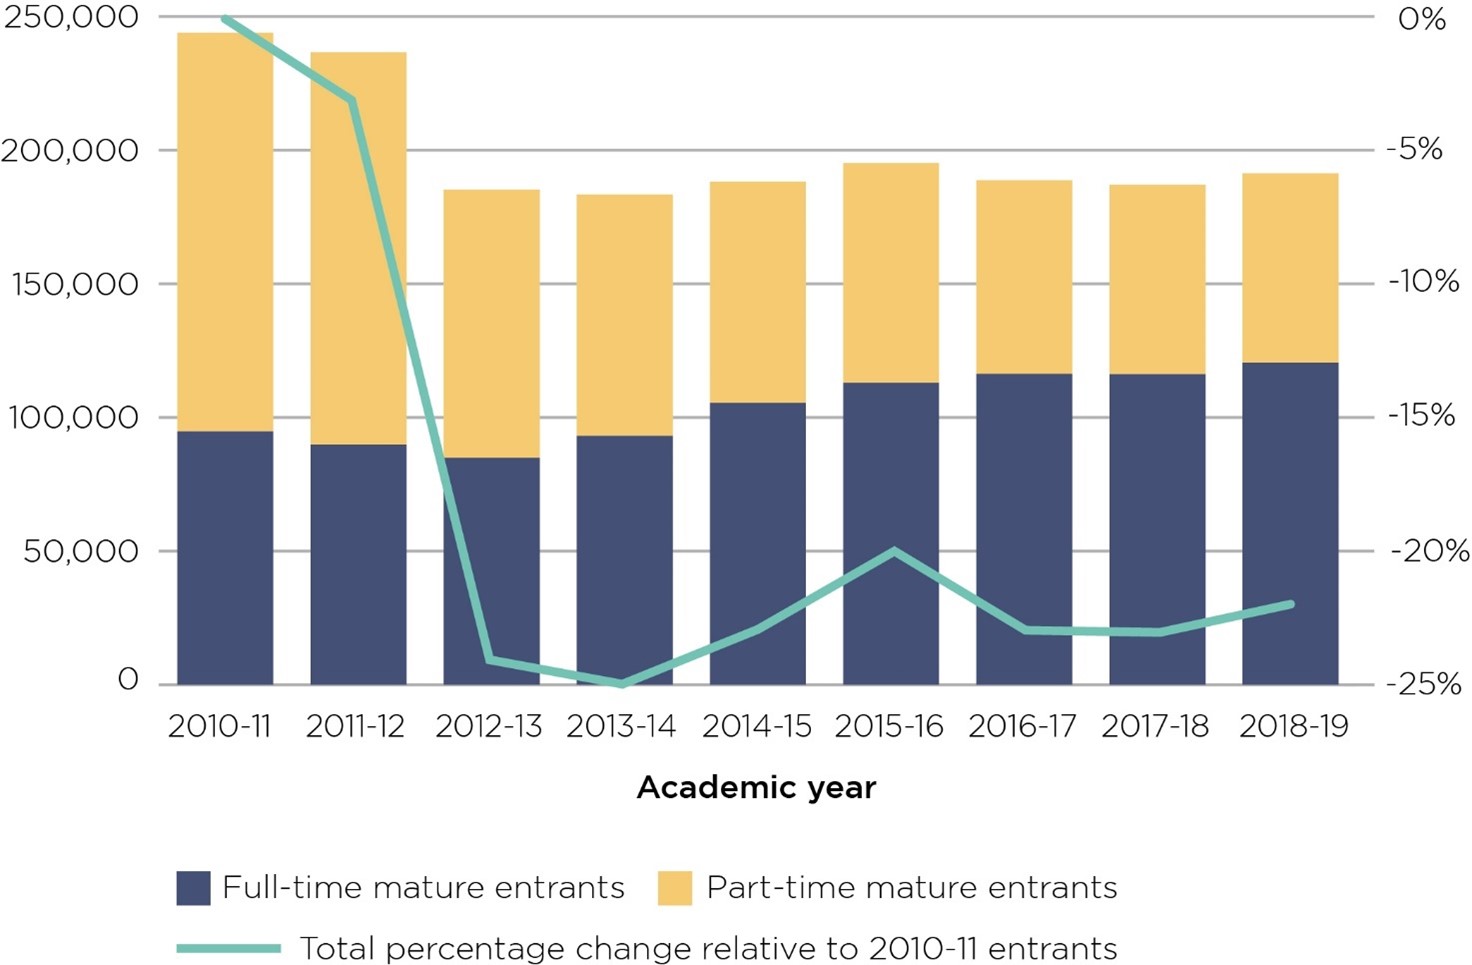 Figure 6: Number of mature undergraduate entrants to English higher education providers